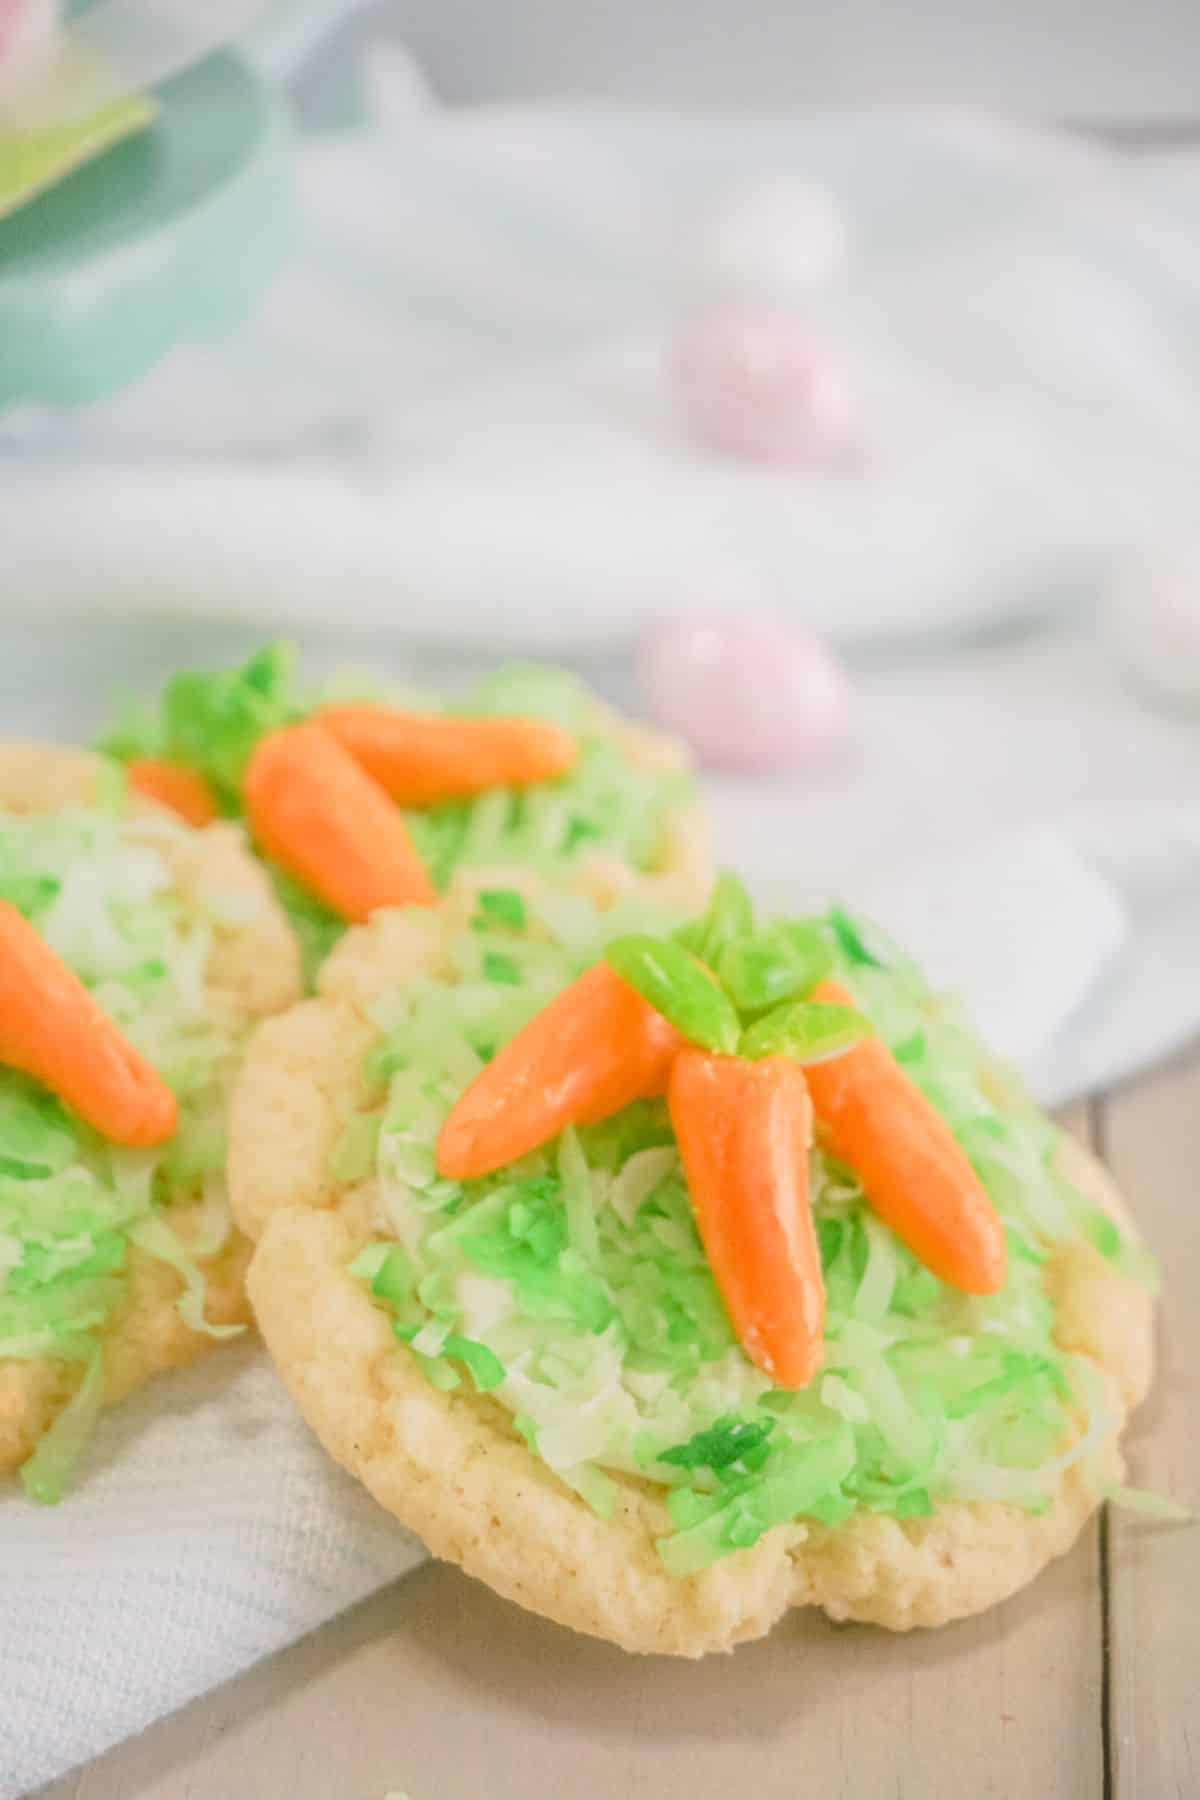 Carrot Sugar Cookies on a white cloth. easter egg candies on the side.